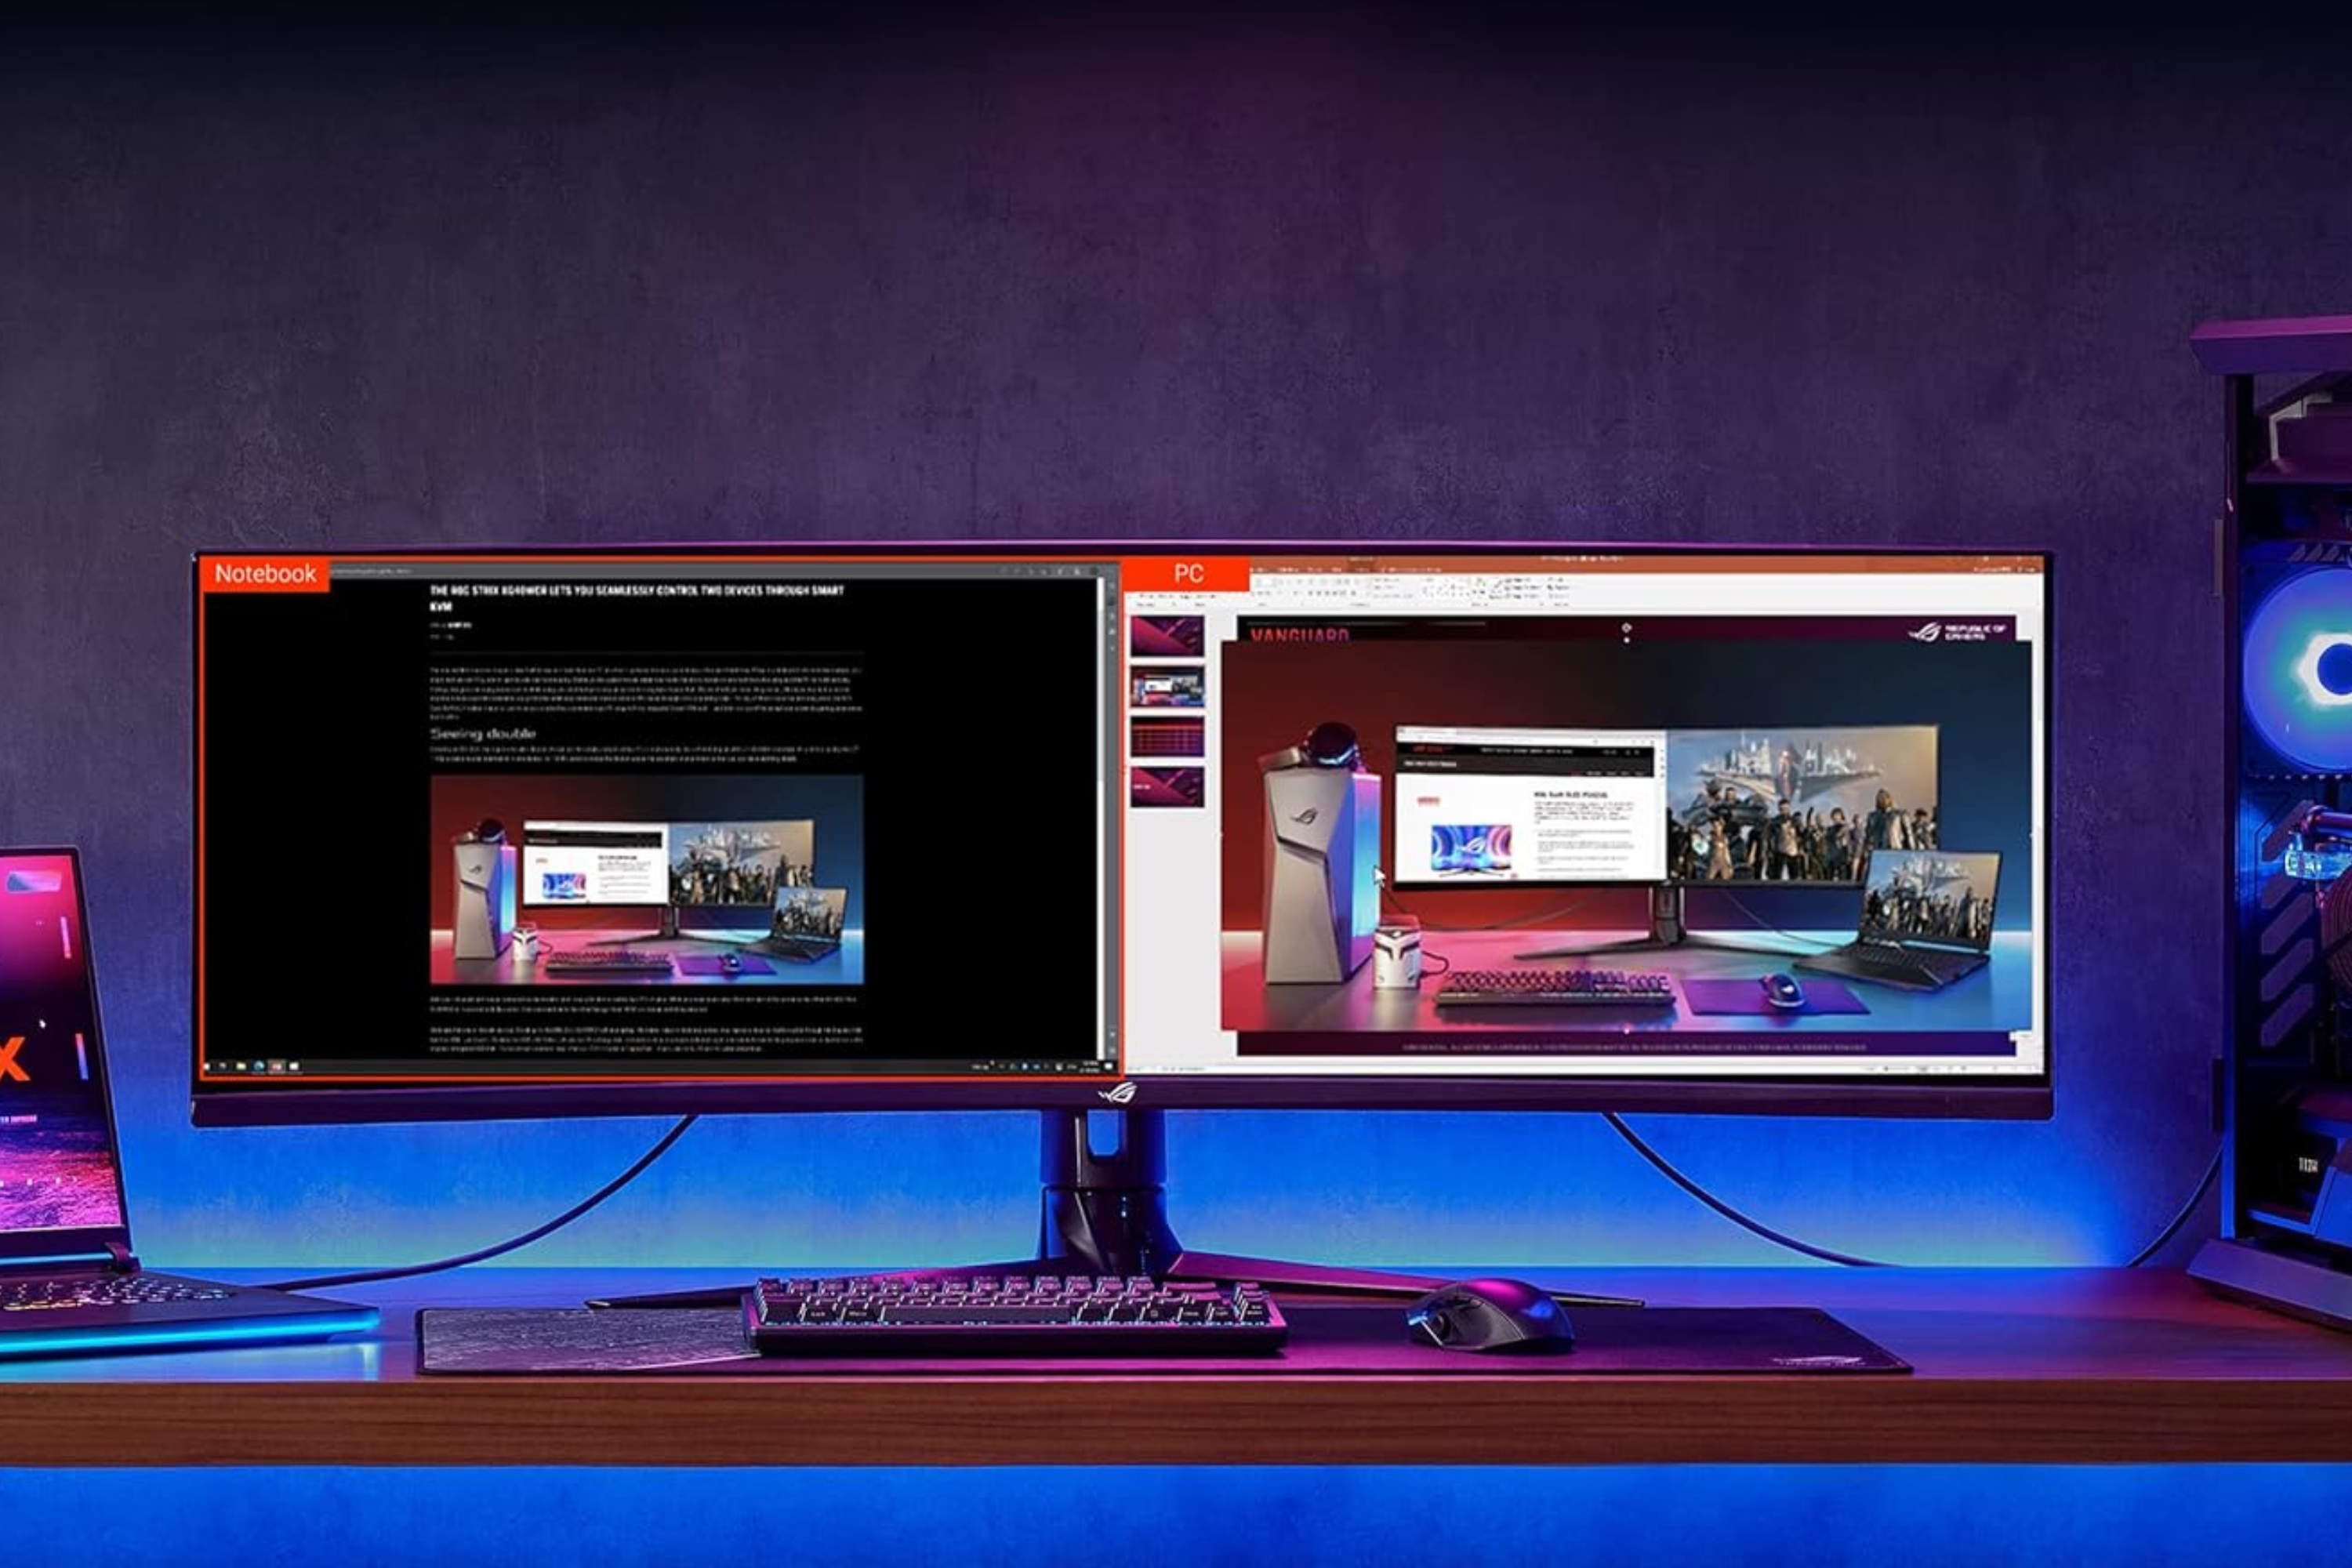 ASUS ROG Strix 49” Ultra-wide Curved HDR Gaming Monitor on table with PC and laptop connected